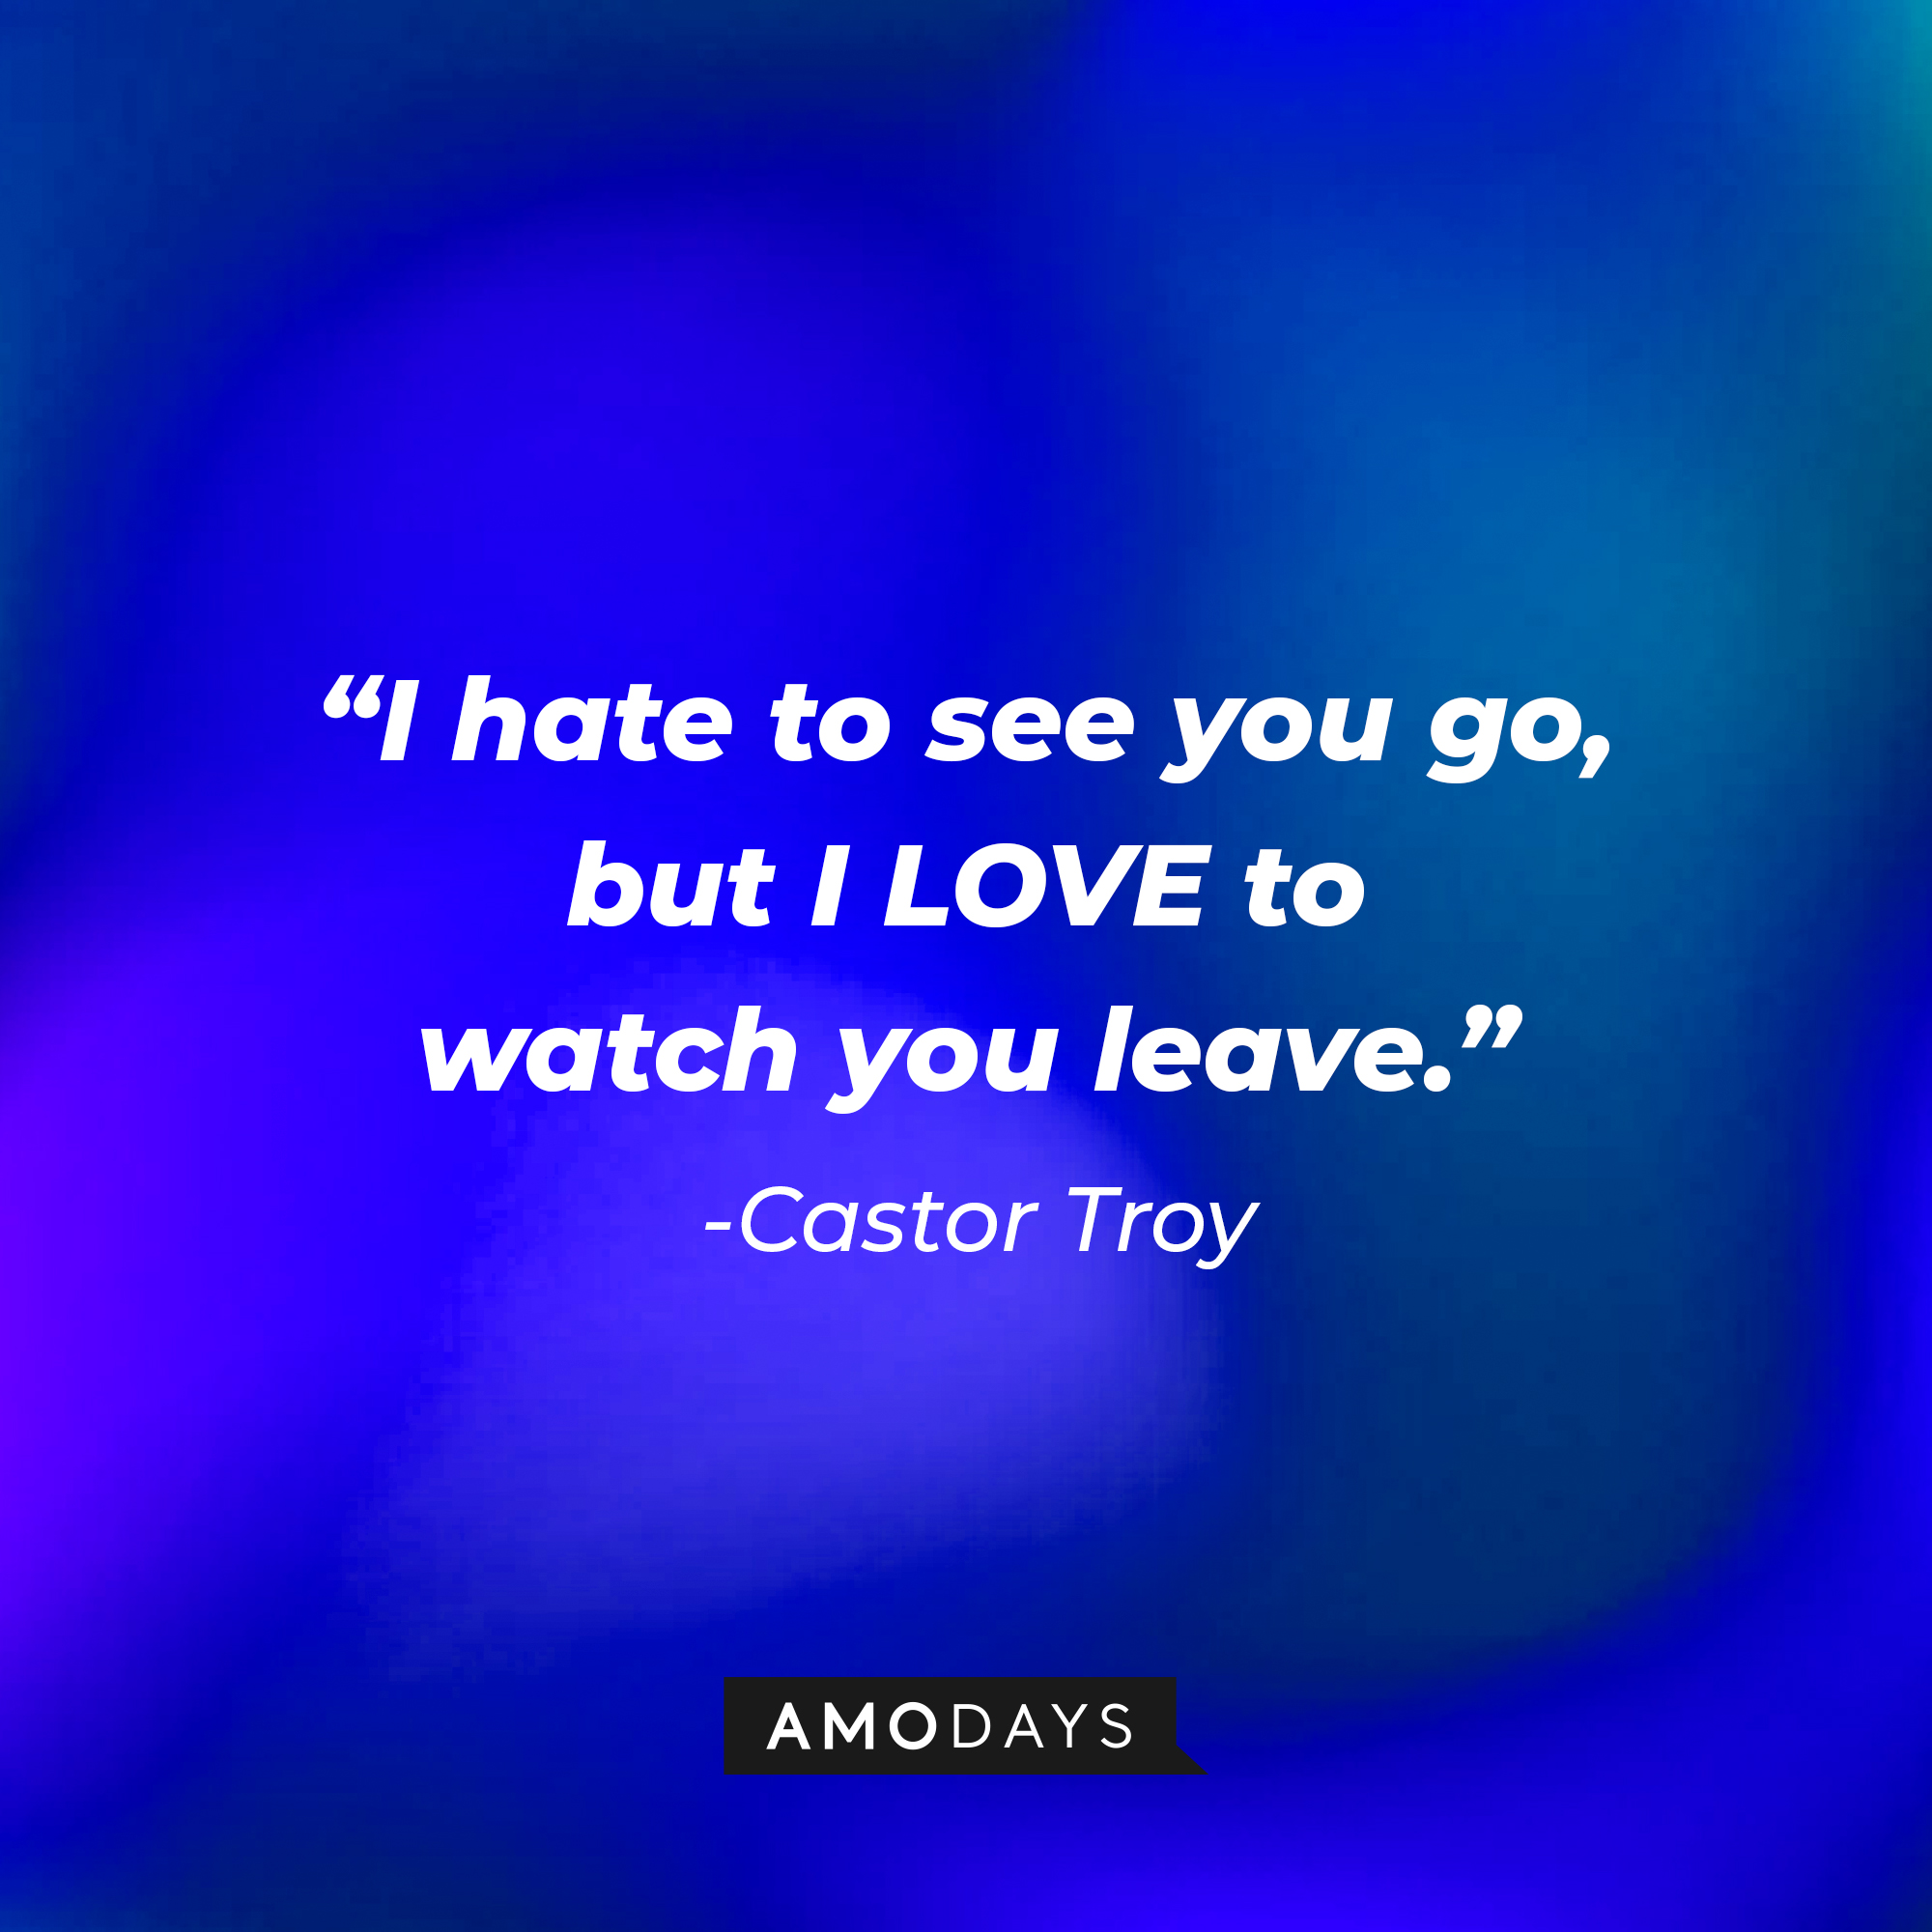 Castor Troy's quote: “I hate to see you go, but I LOVE to watch you leave.” : Source: Amodays